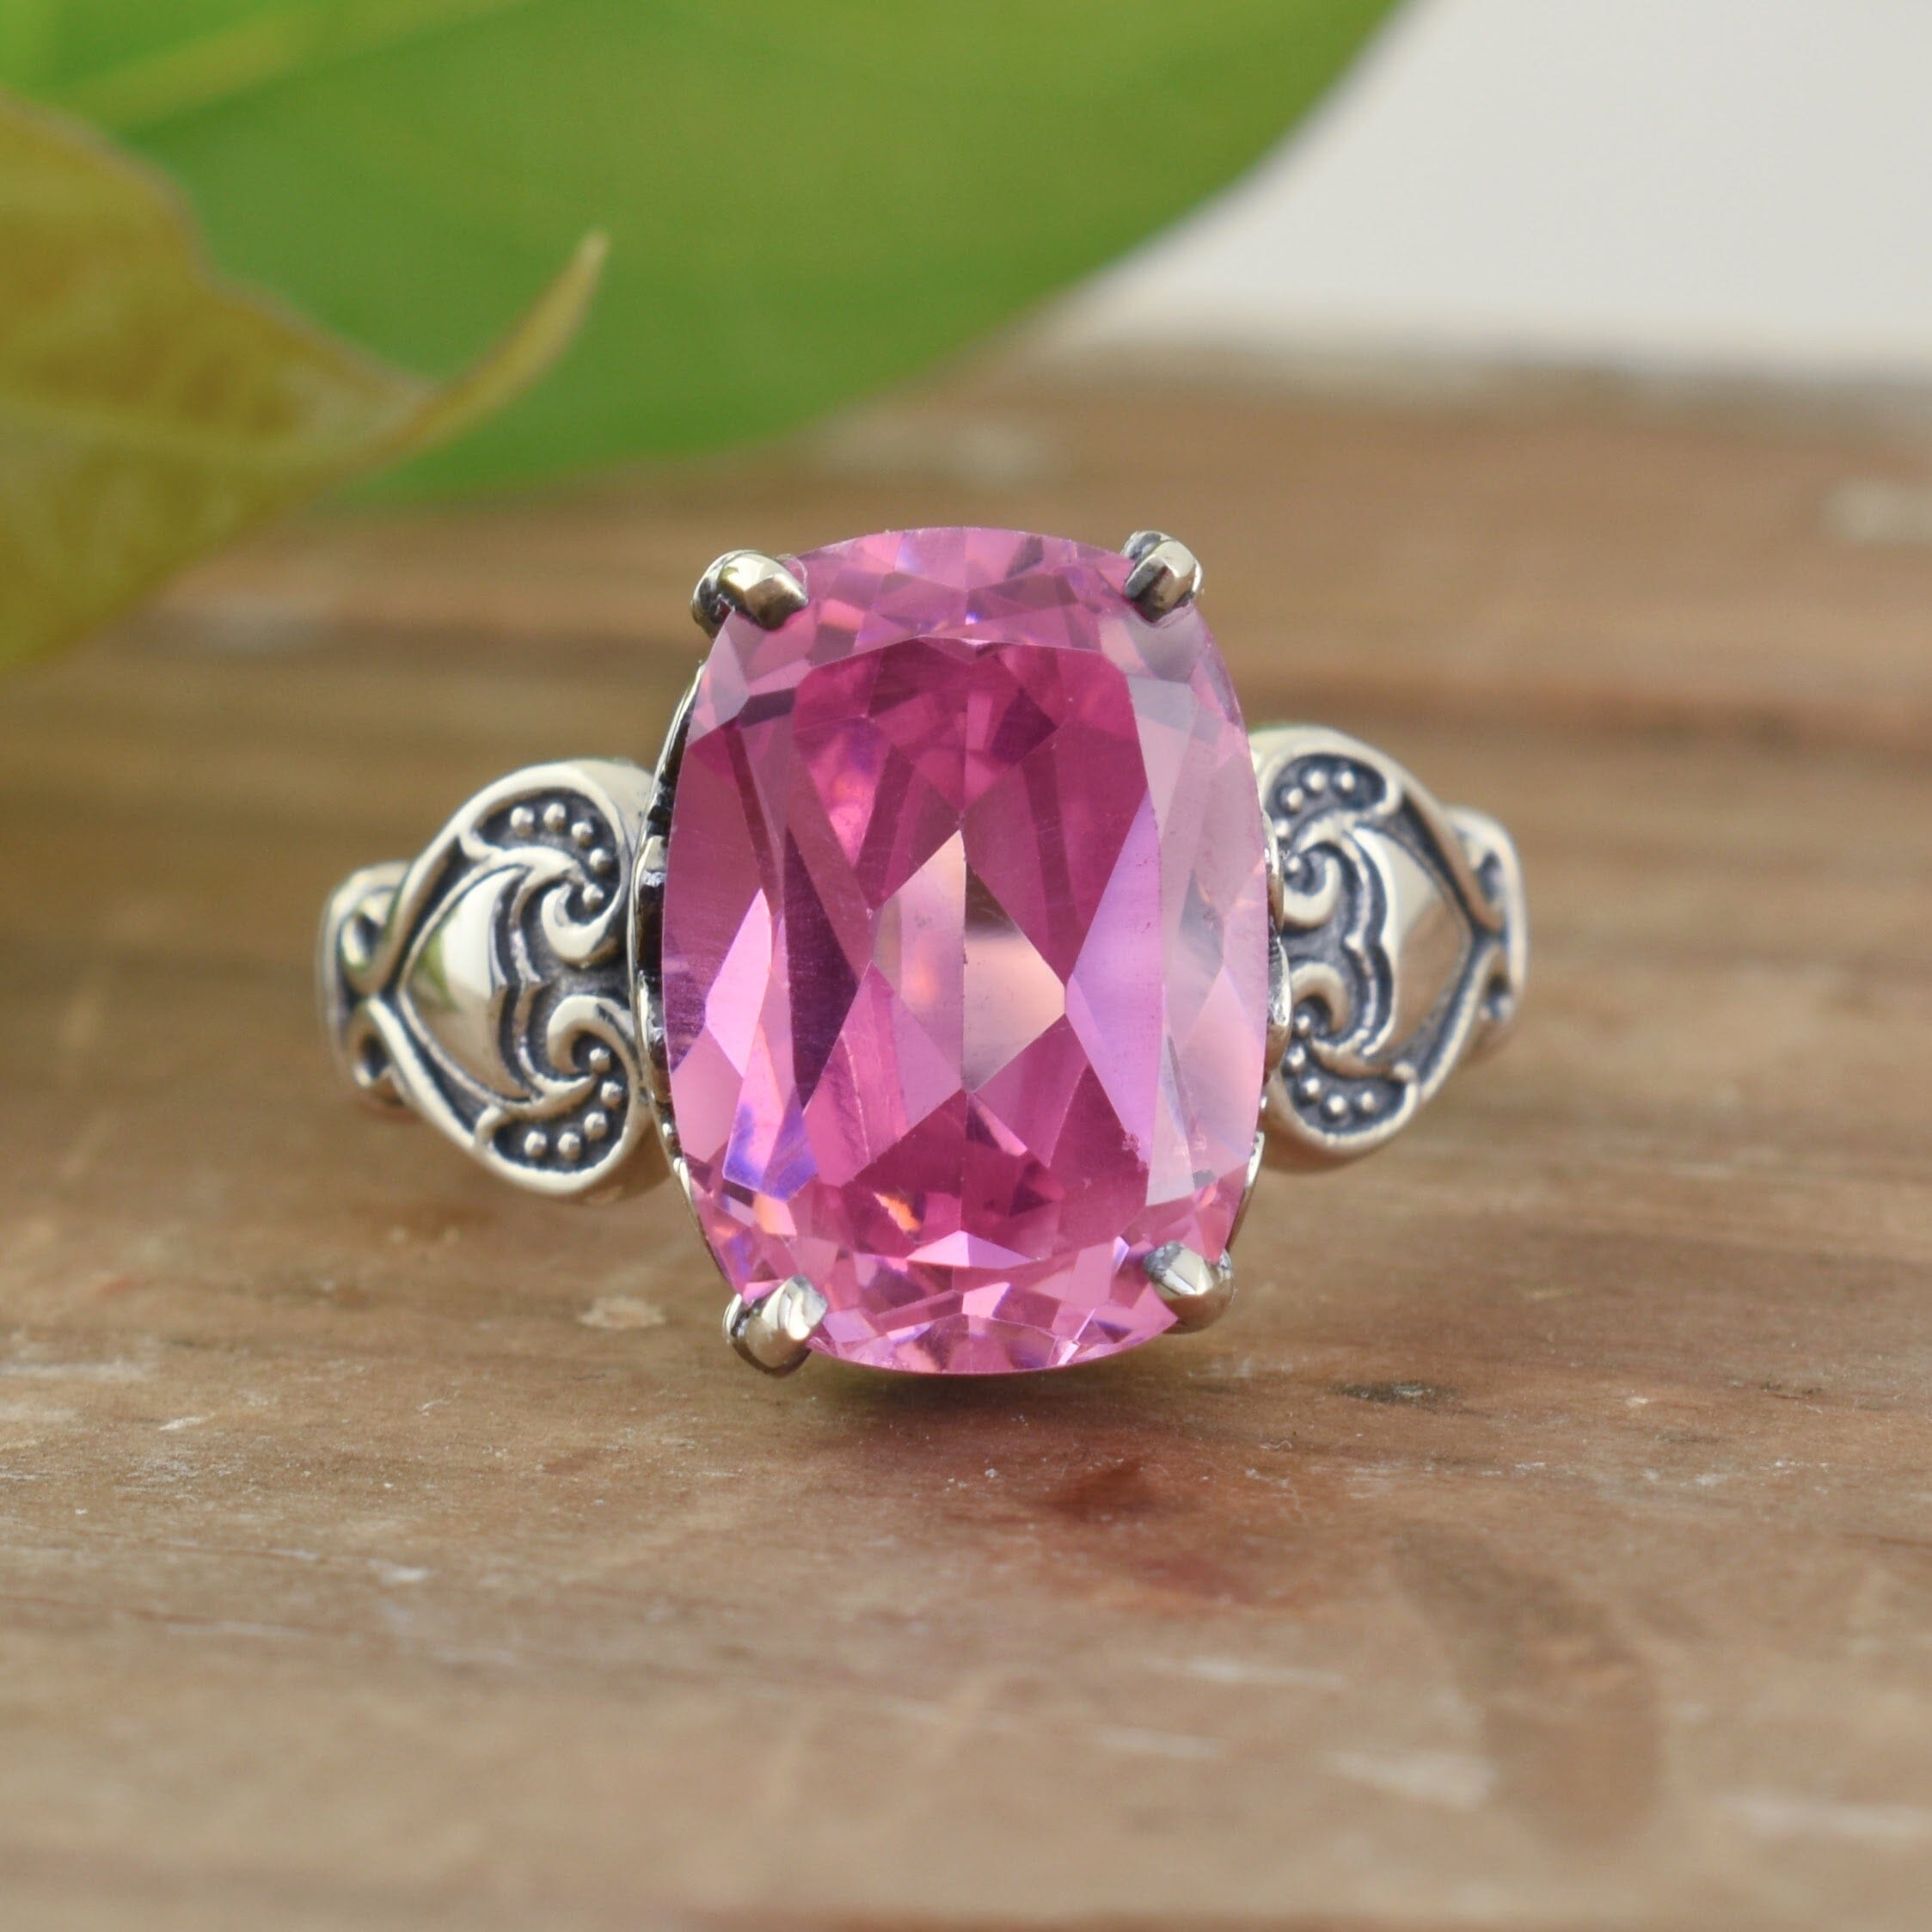 Pink cz oval stone ring